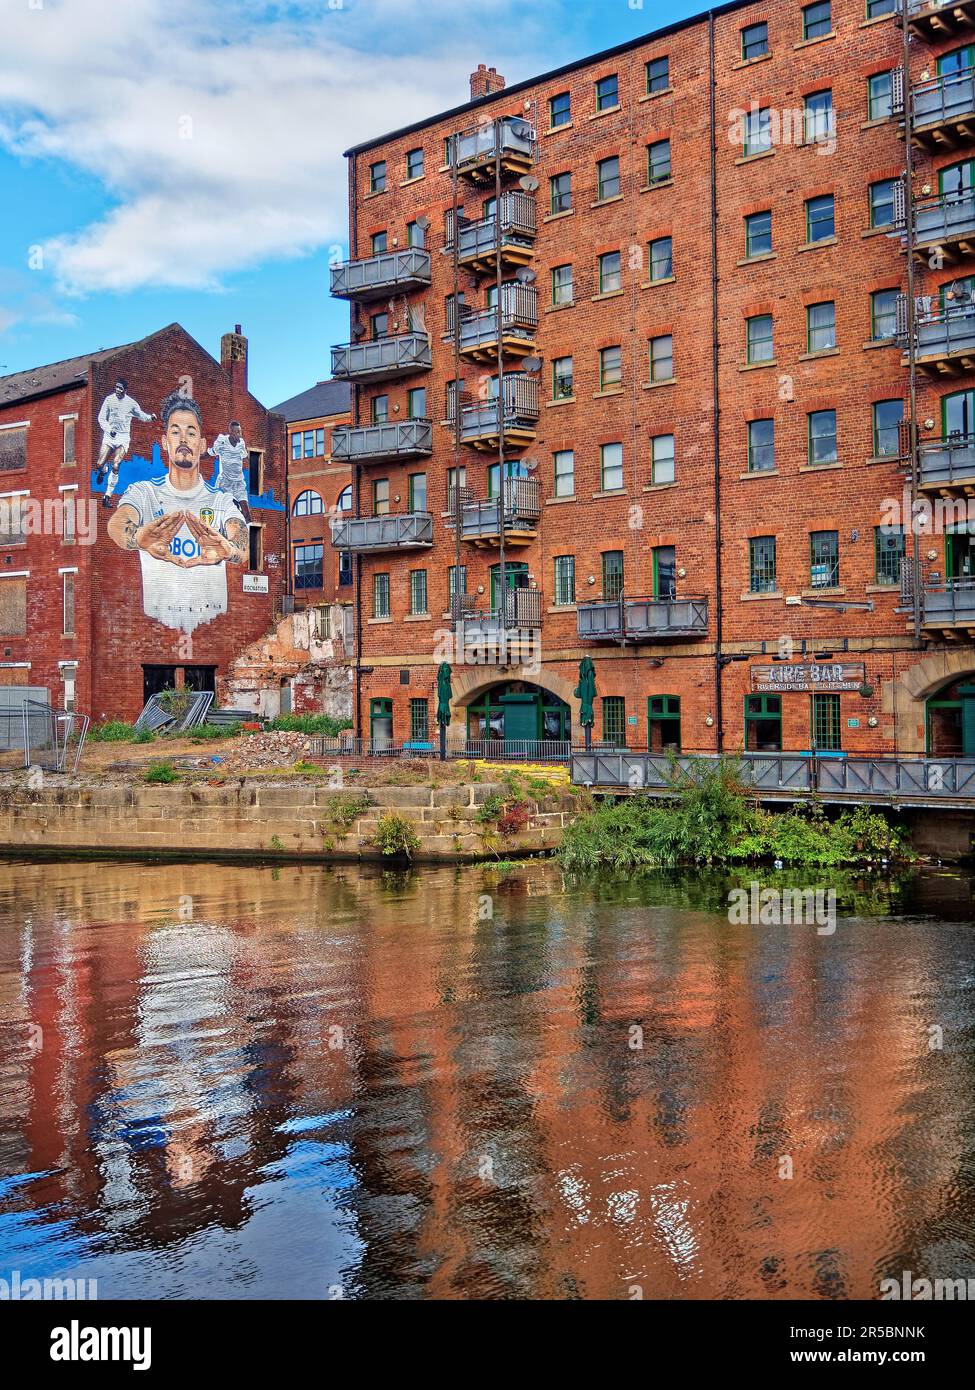 UK, West Yorkshire, Leeds, River Aire at Calls Landing Stock Photo